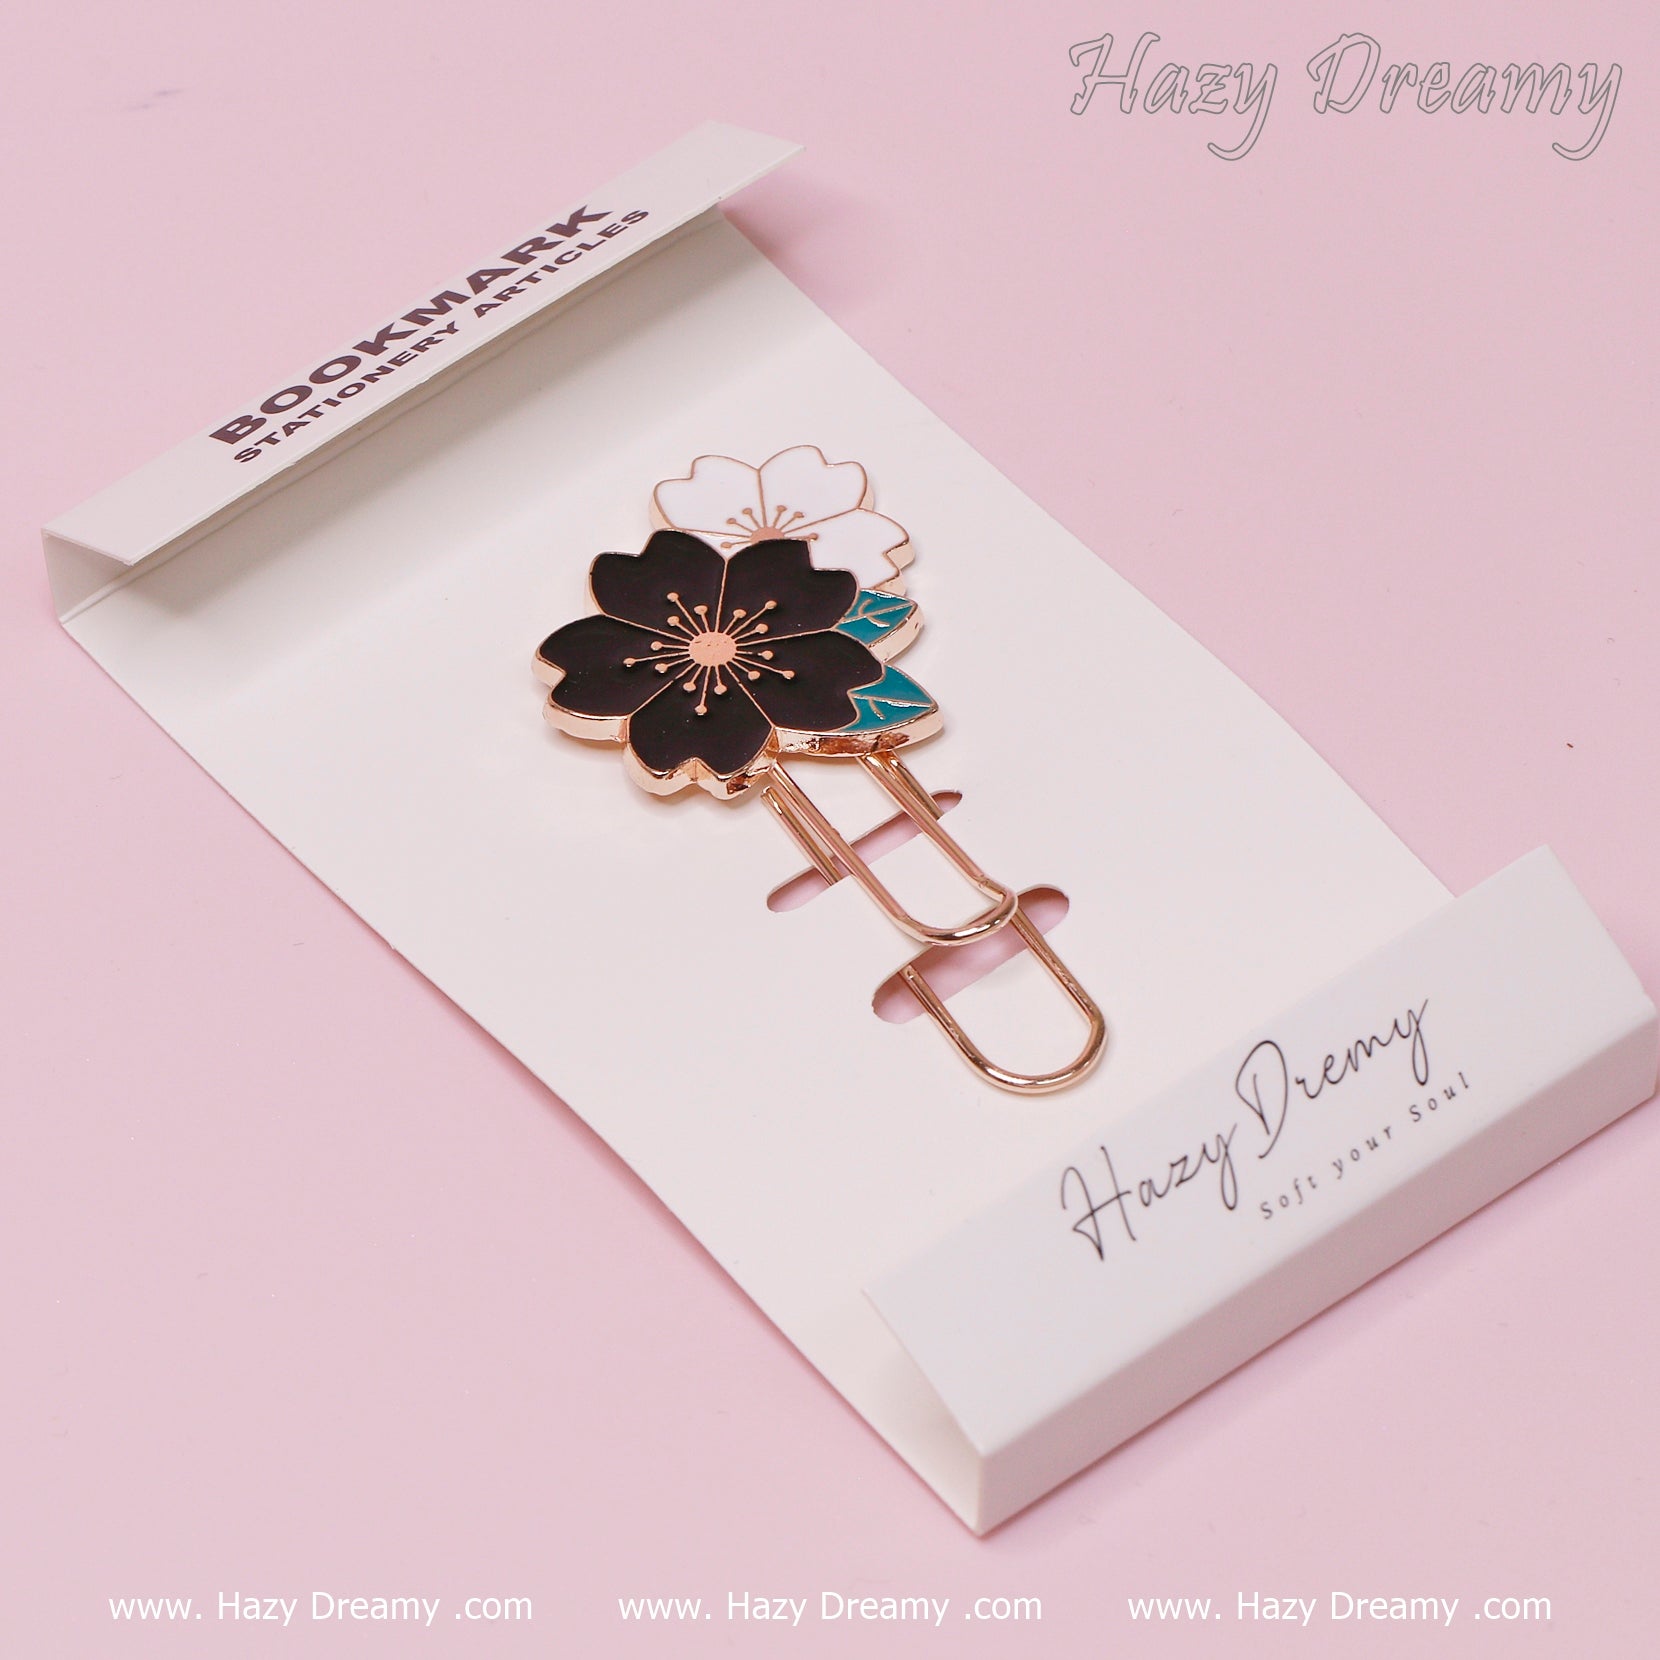 2-in-1 Cute Flower Metal Bookmarks Page Holder and Paper Clip - Hazy Dreamy: School Stationery